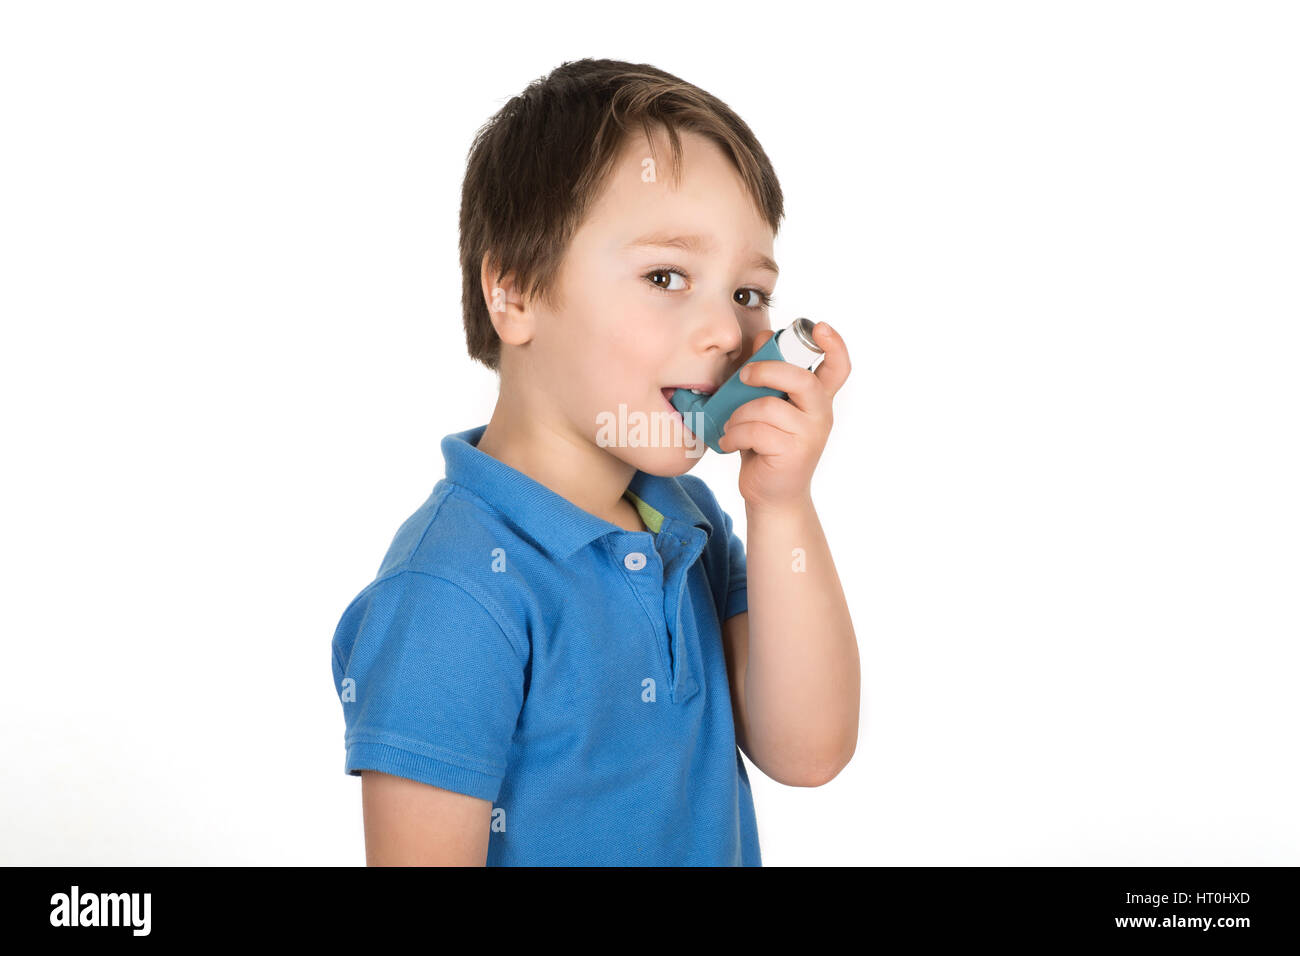 Asthmatic boy using a metered-dose blue Inhaler 'Puffer'. Isolated on a white background. Stock Photo